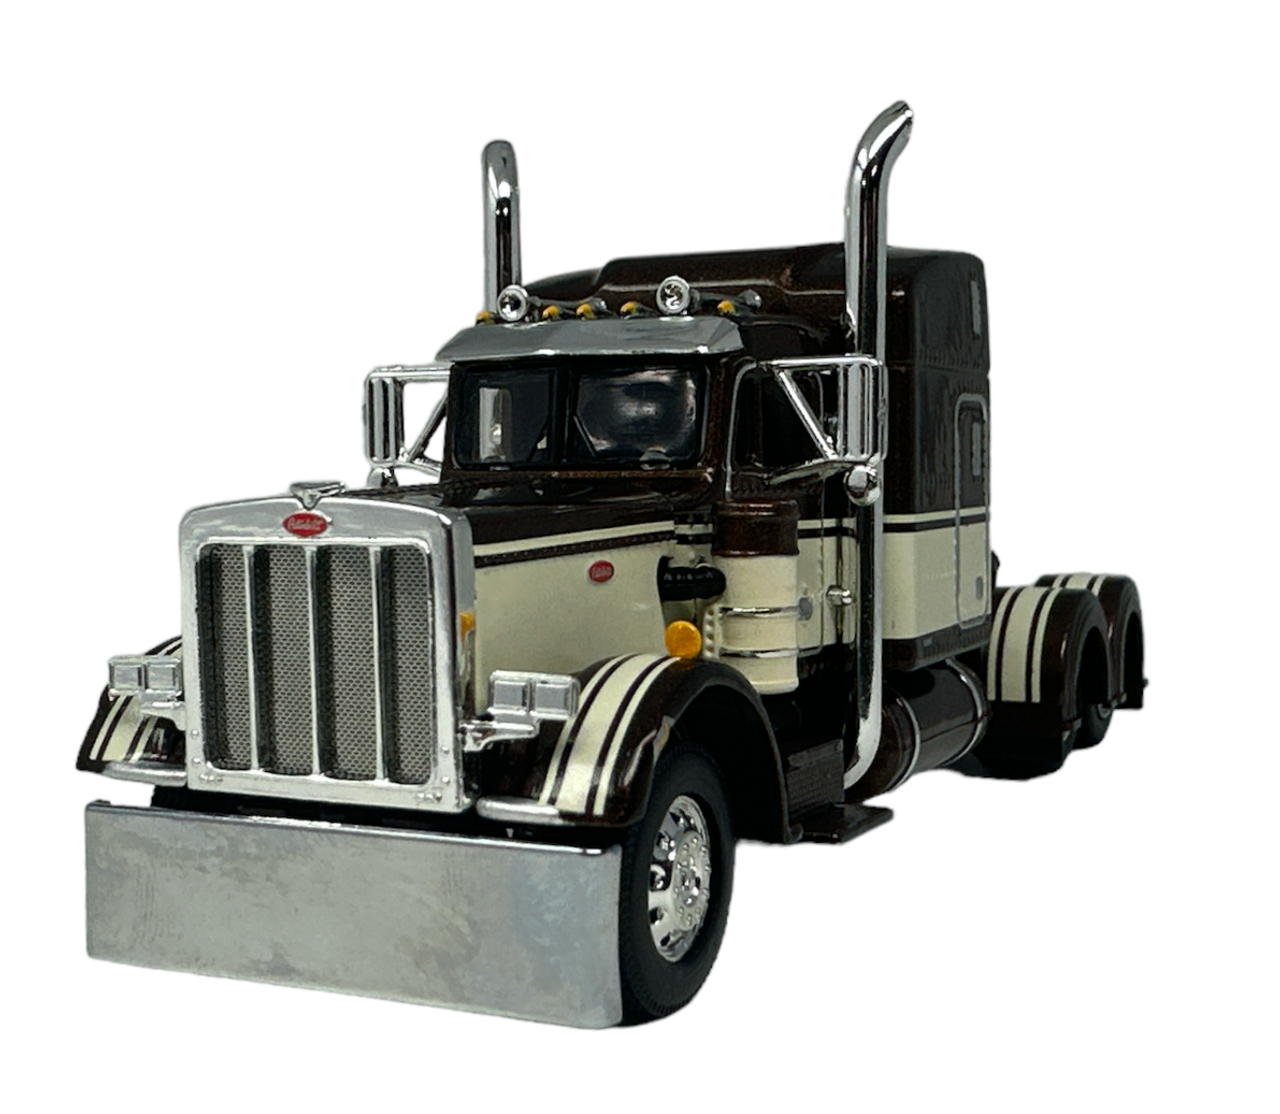 60-1675C - Brown/Cream 1/64 scale Peterbilt Model 359 Cab with 63" Mid-Roof Sleeper and Rear Show Fenders